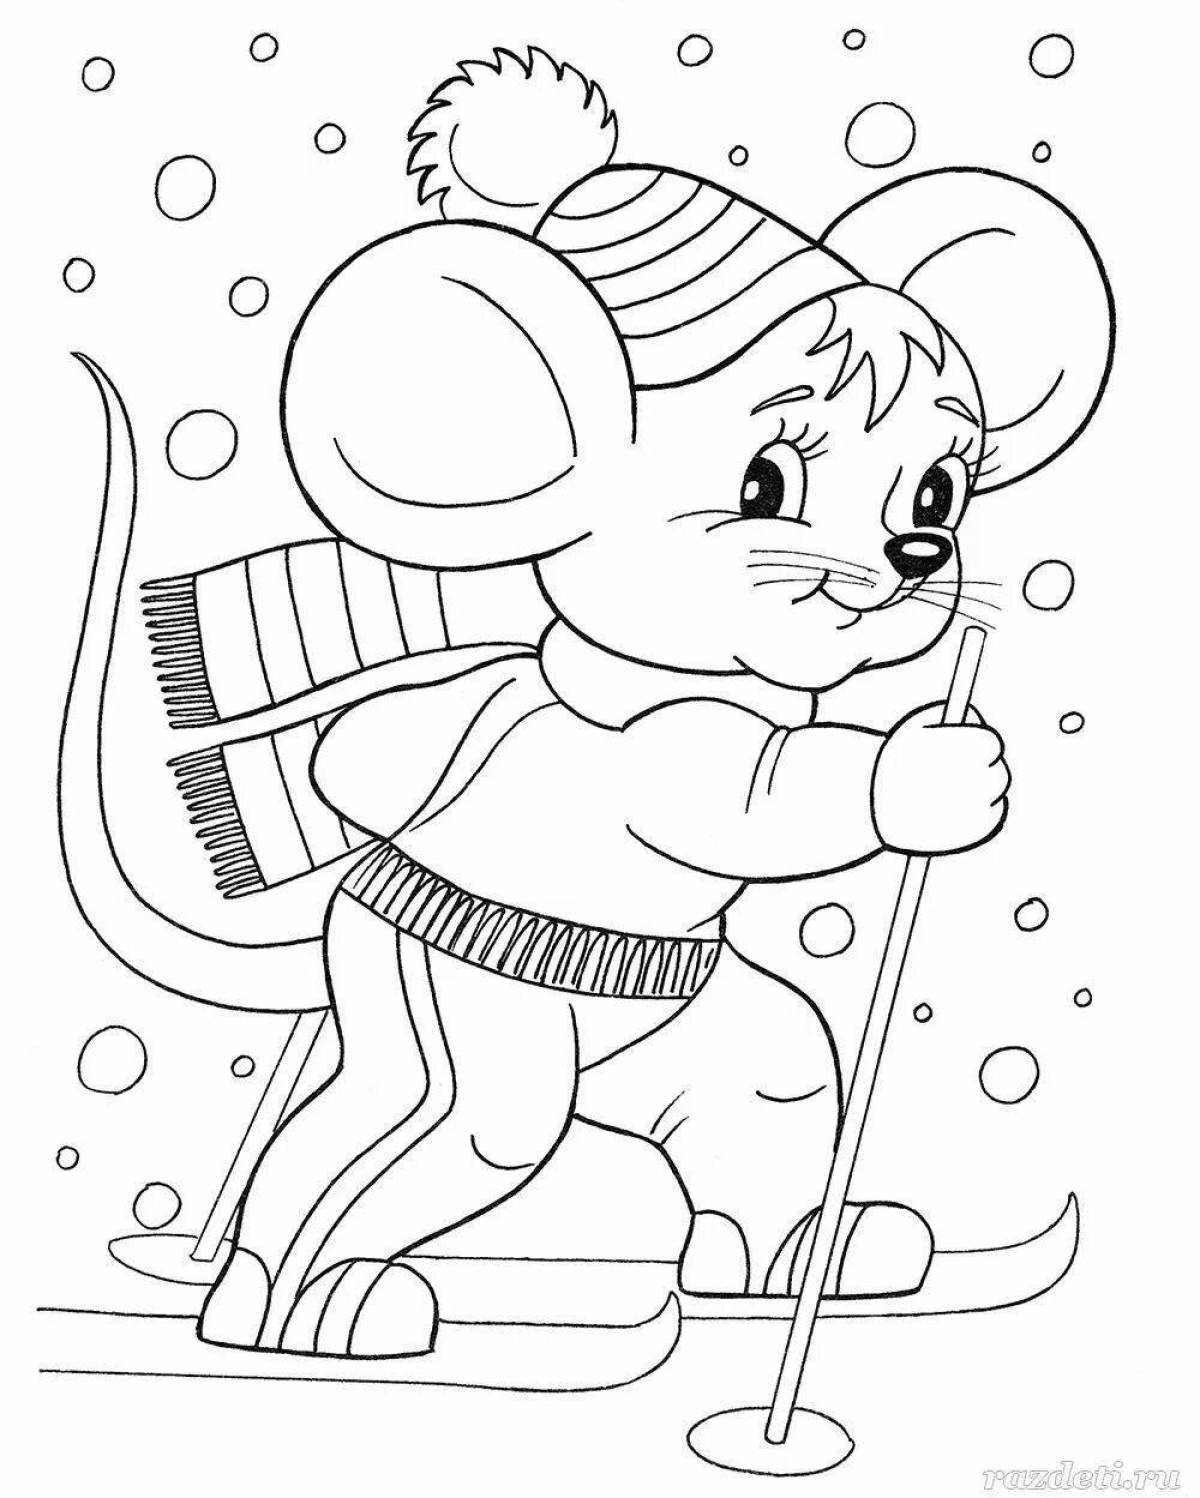 Glorious Christmas coloring book for preschoolers